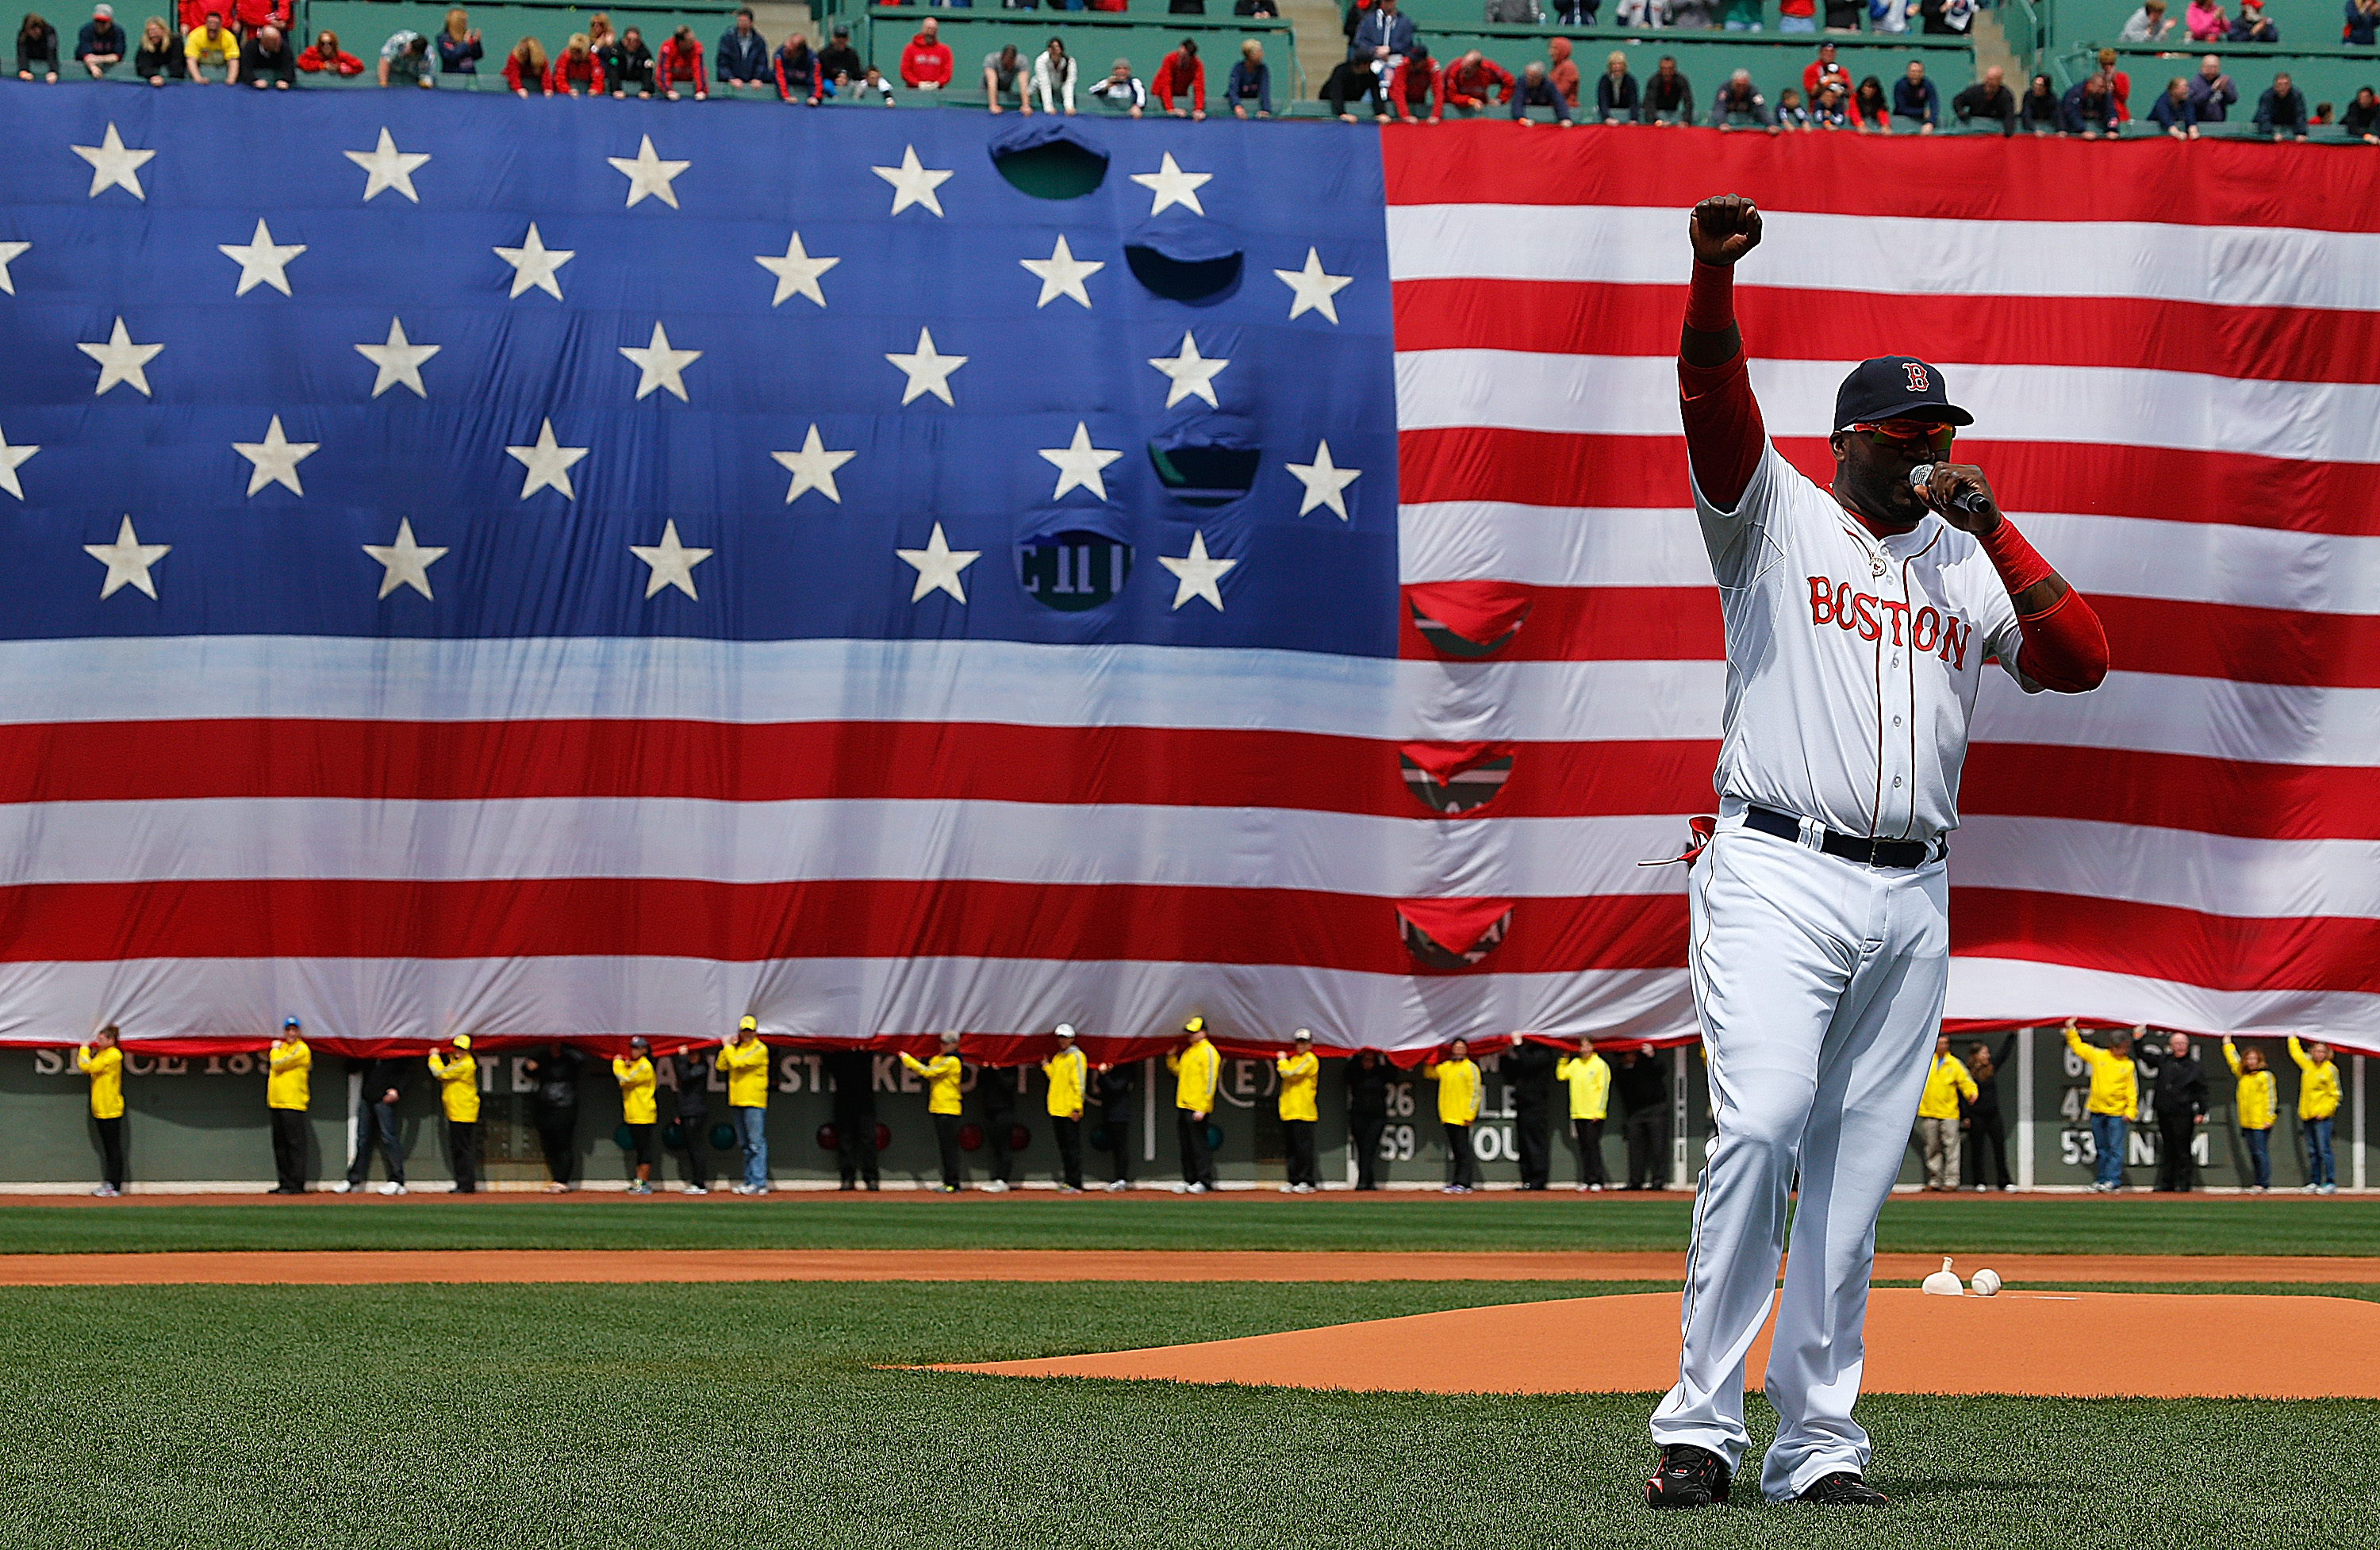 Ortiz rallied the city of Boston with a poignant and profane speech ahead of the April 20 game against the Royals. The game came just days after the bombing at the Boston Marathon finish line, and the day after one of the bombers was found following a manhunt. "This is our [expletive] city," Ortiz said to the crowd. The Red Sox won.